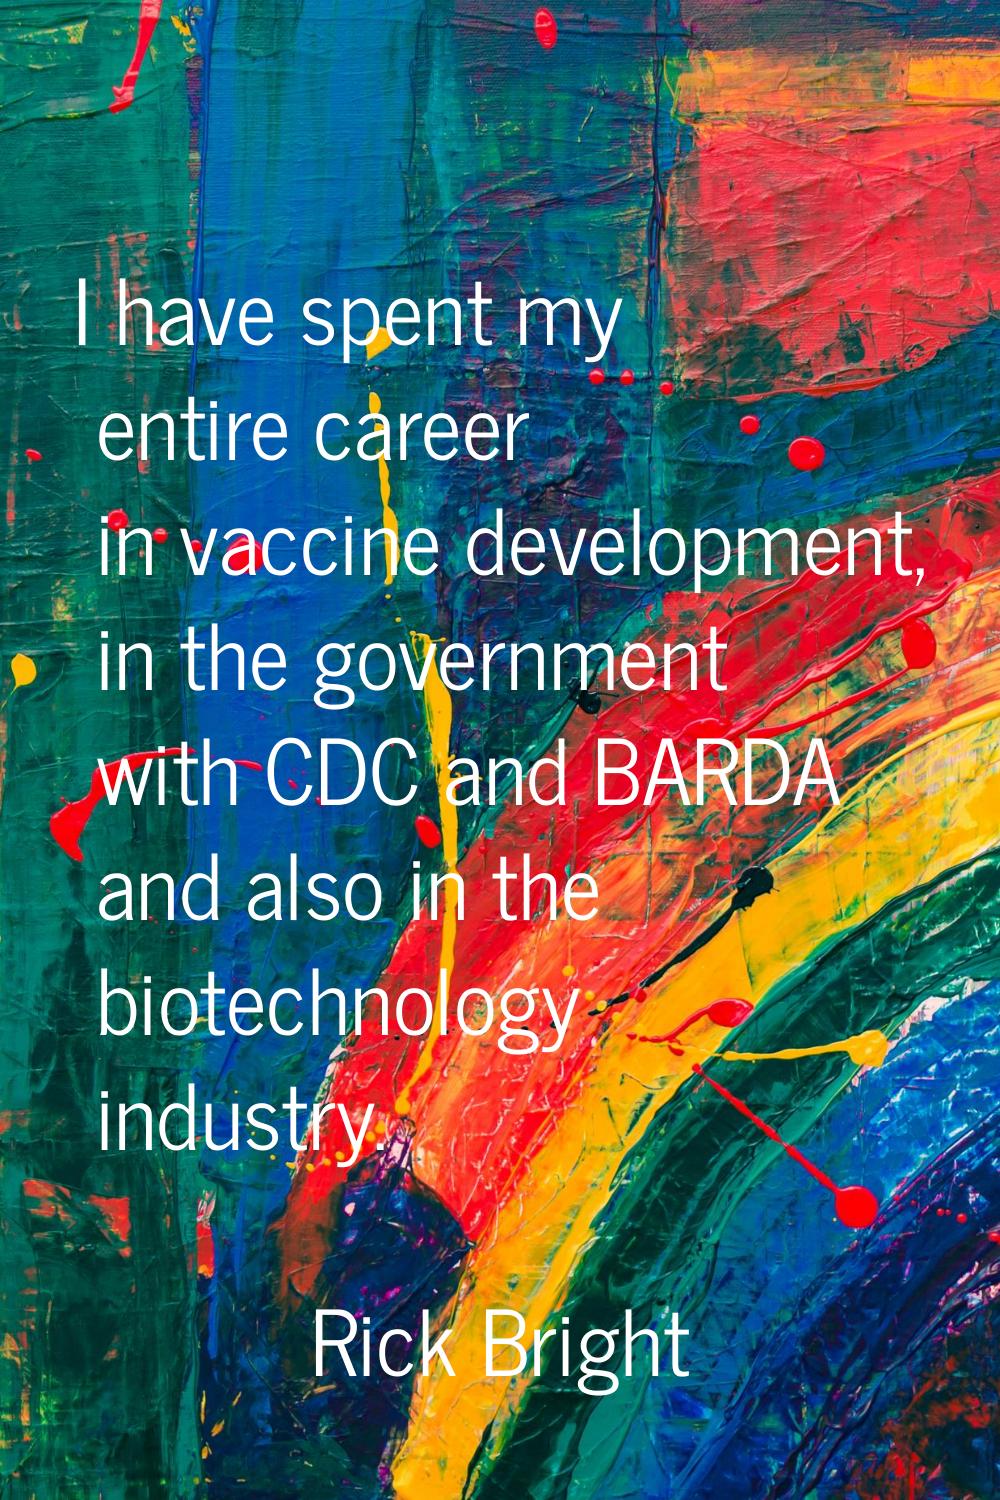 I have spent my entire career in vaccine development, in the government with CDC and BARDA and also